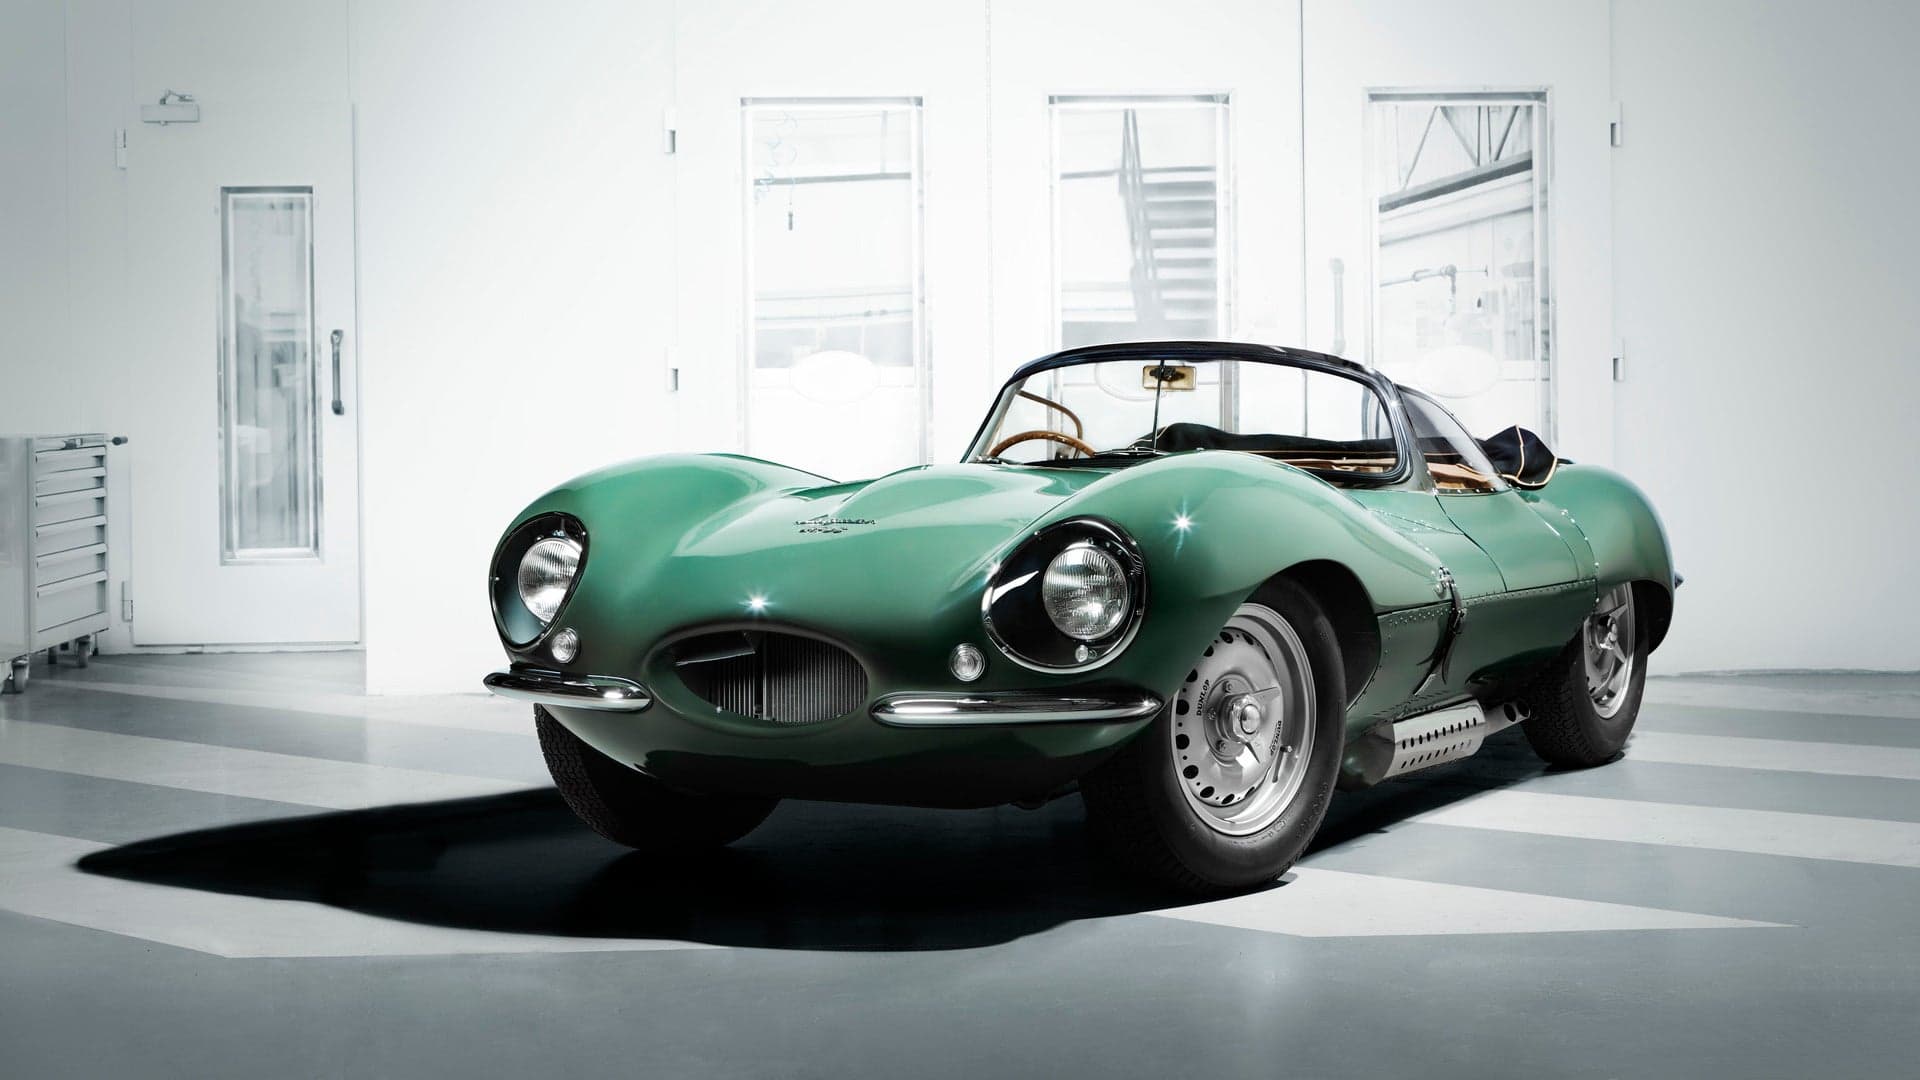 You Should be Excited for the Jaguar XKSS